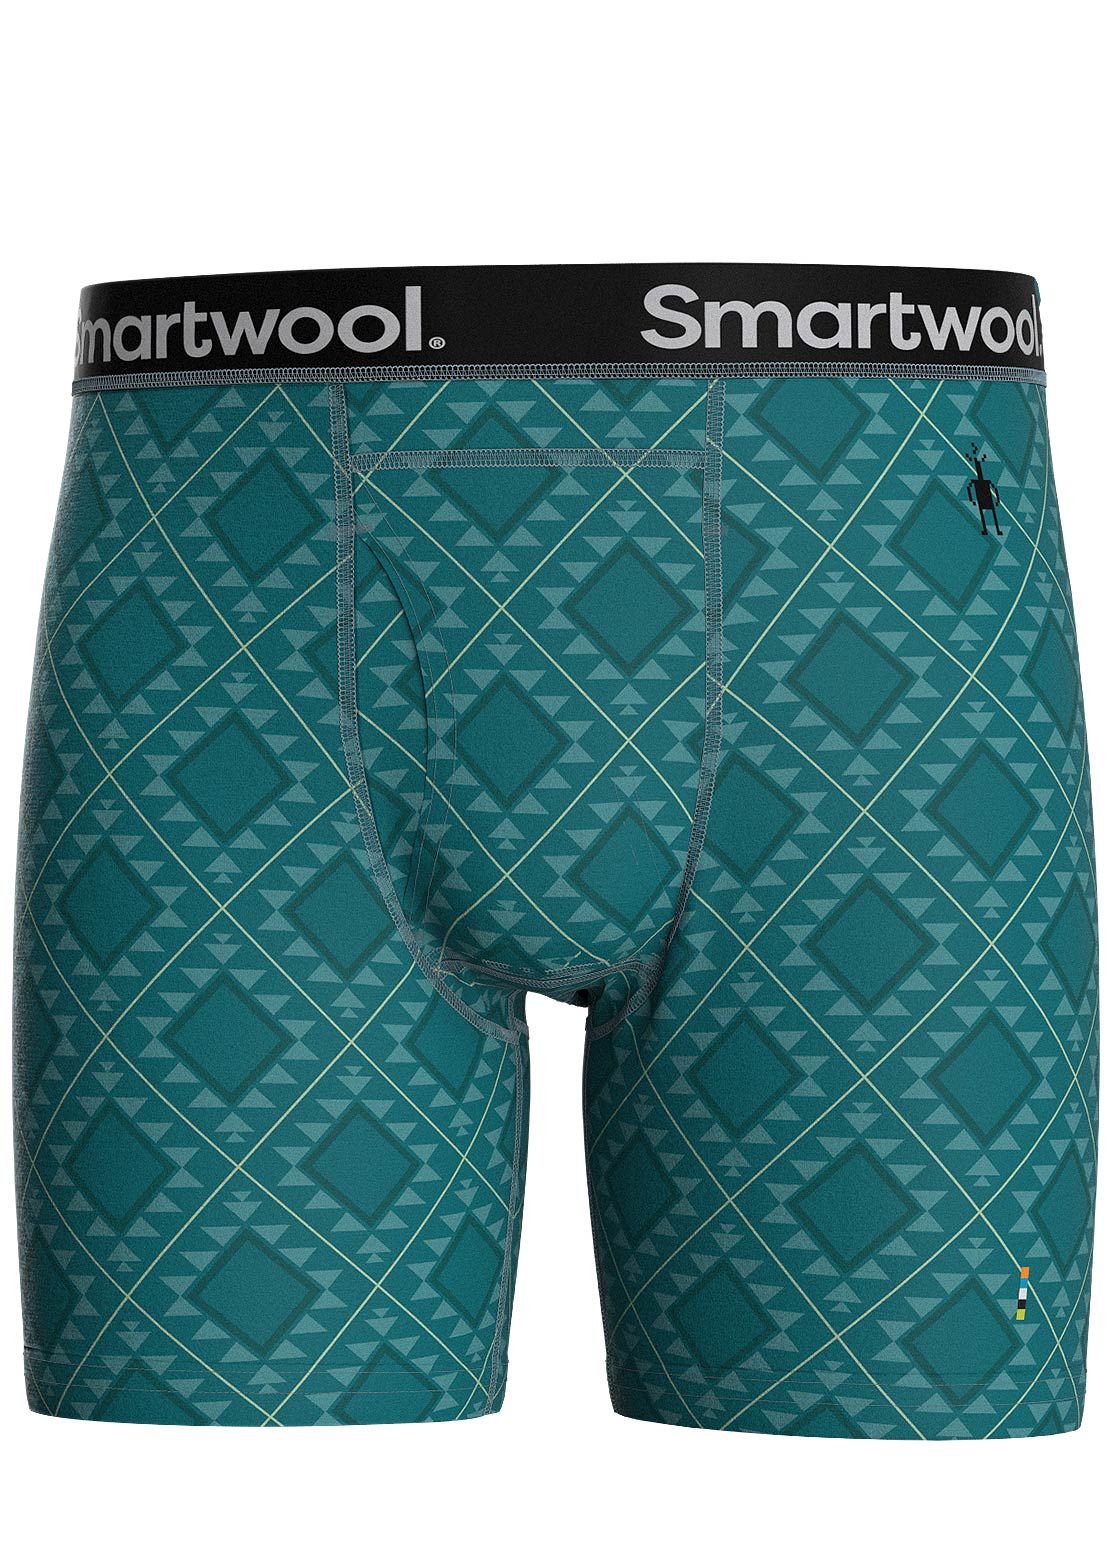 Smartwool Intraknit Boxed 6 In Boxer Brief - Men's